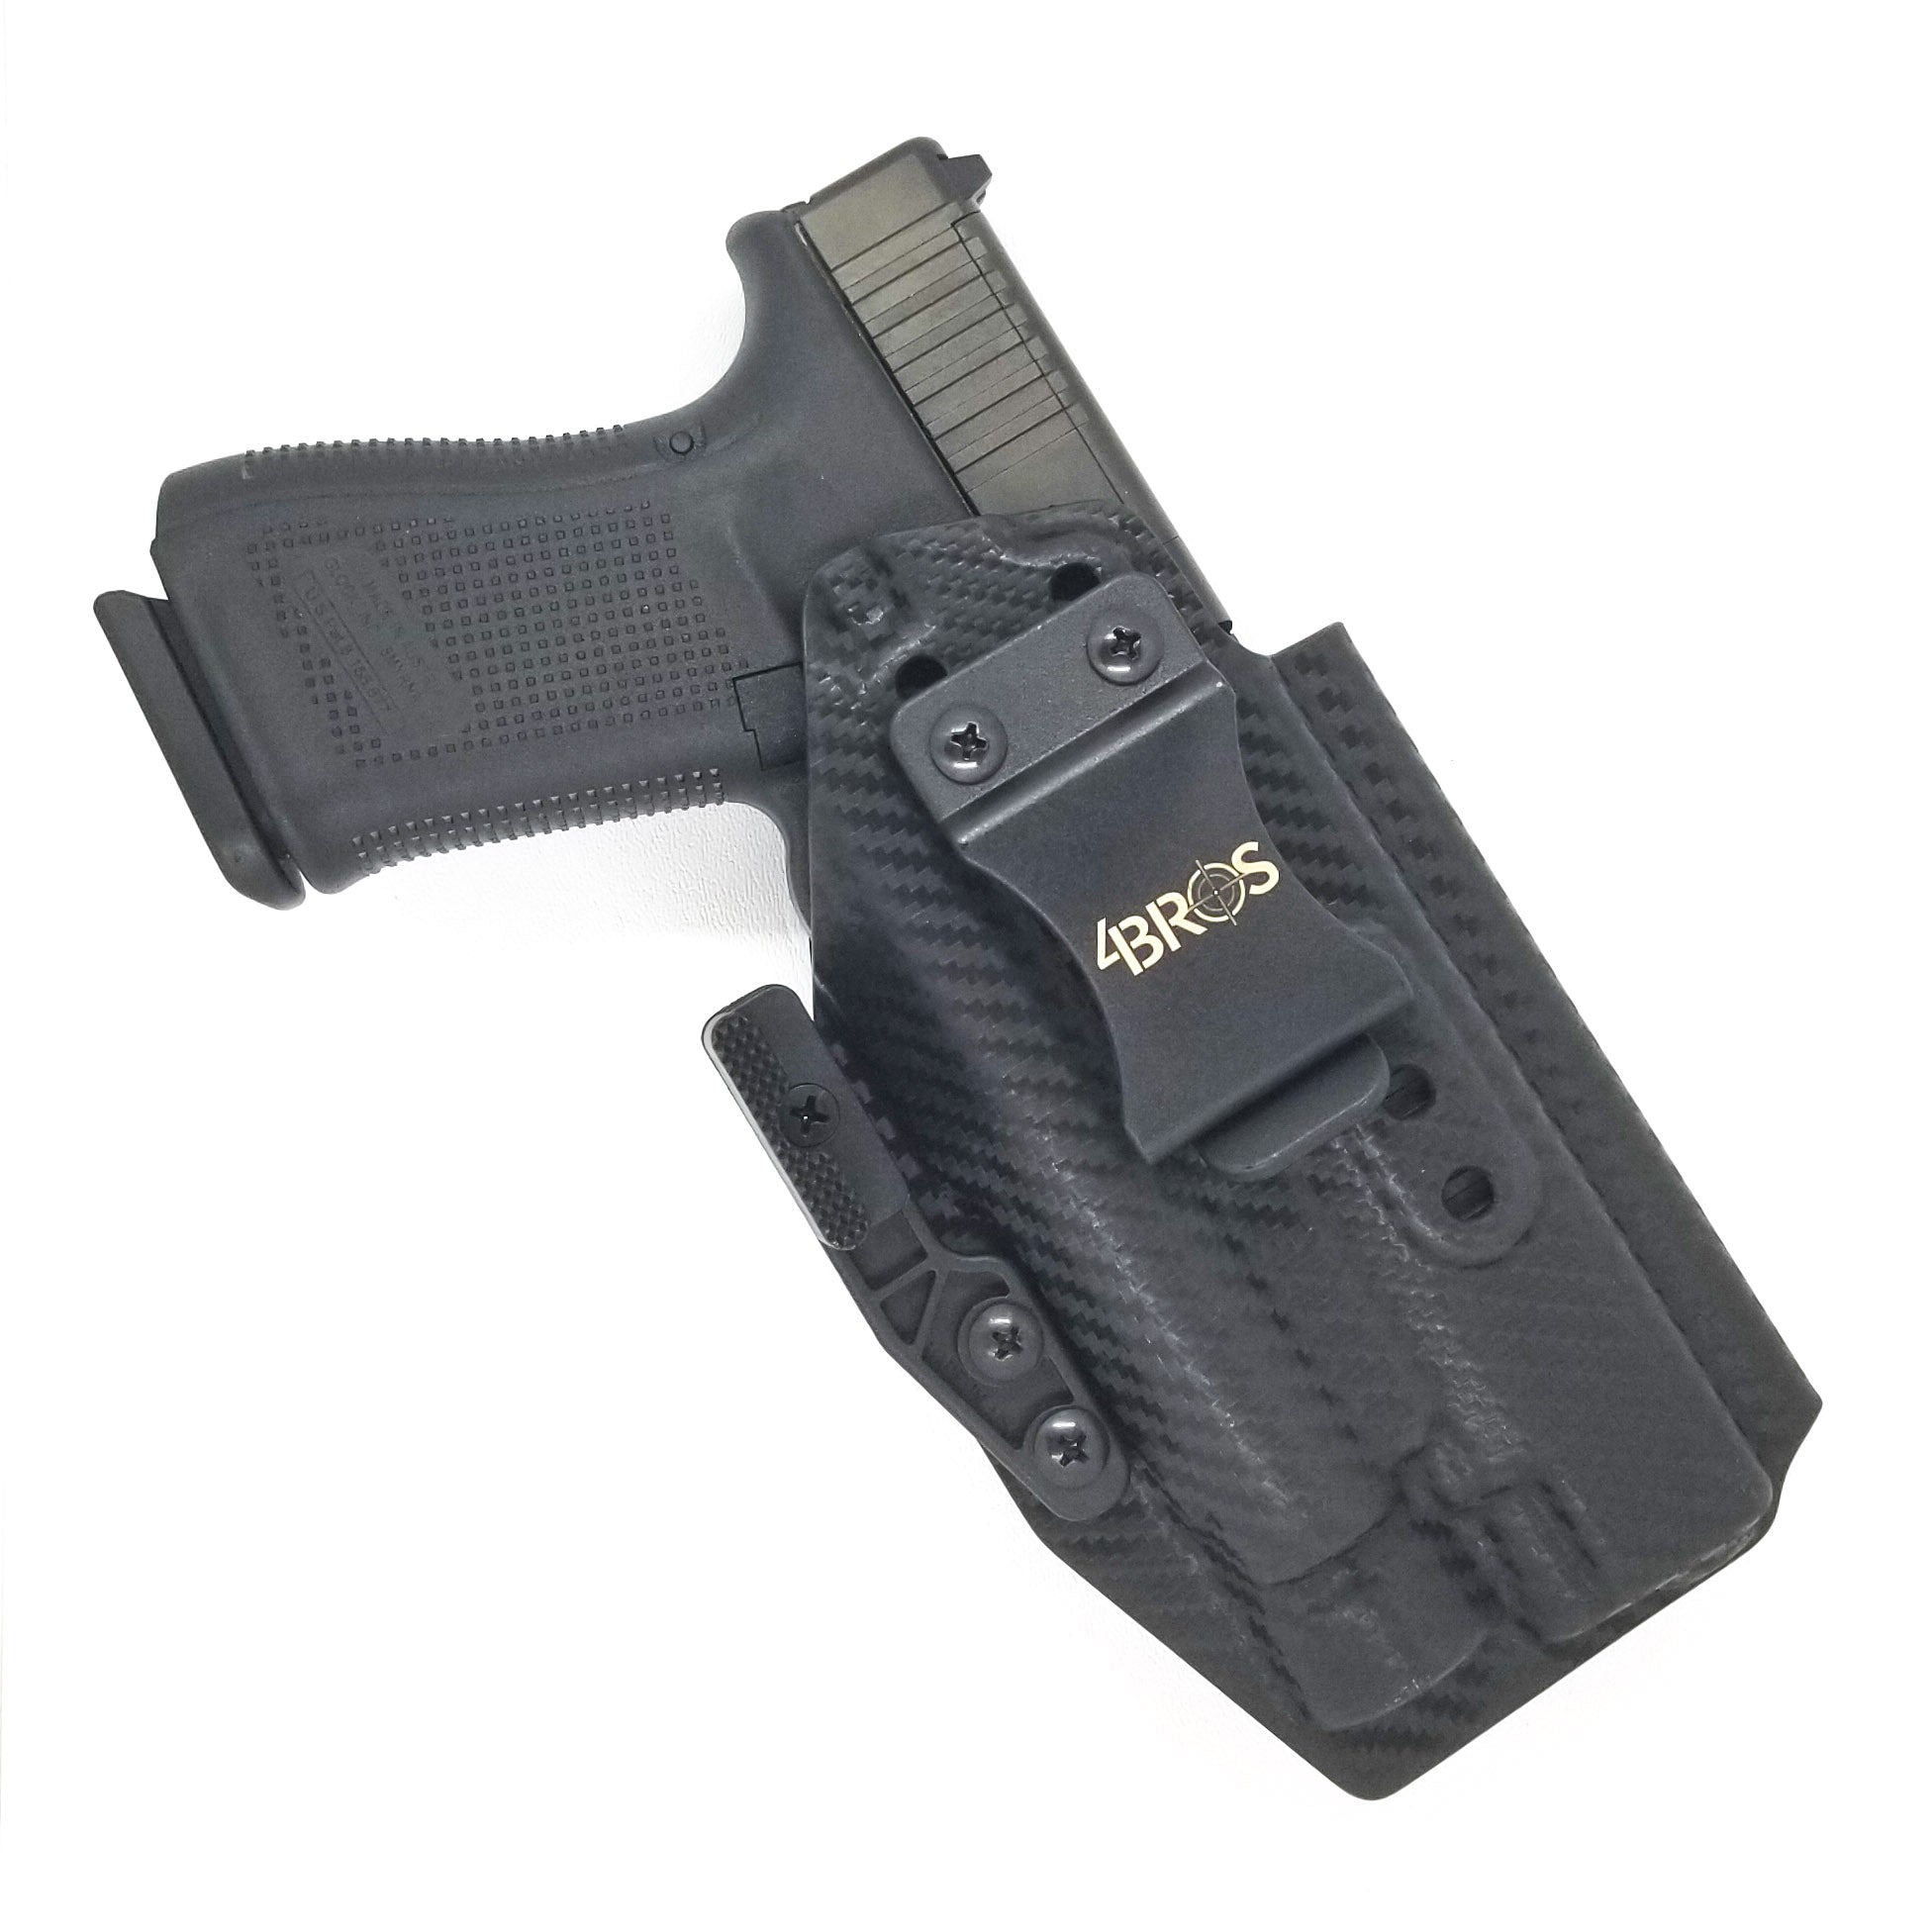 Inside Waistband Holster designed to fit Generation 3 or 4 Glock compact and full size pistols with Olight PL-Pro Valkyrie or PL-2 Valkyrie weapon mounted light including Glock 19/23/32 compact, 17/22/31 full size and 34/35 models. Adjustable retention. High sweat guard. Modwing to reduced printing, red dot profiled